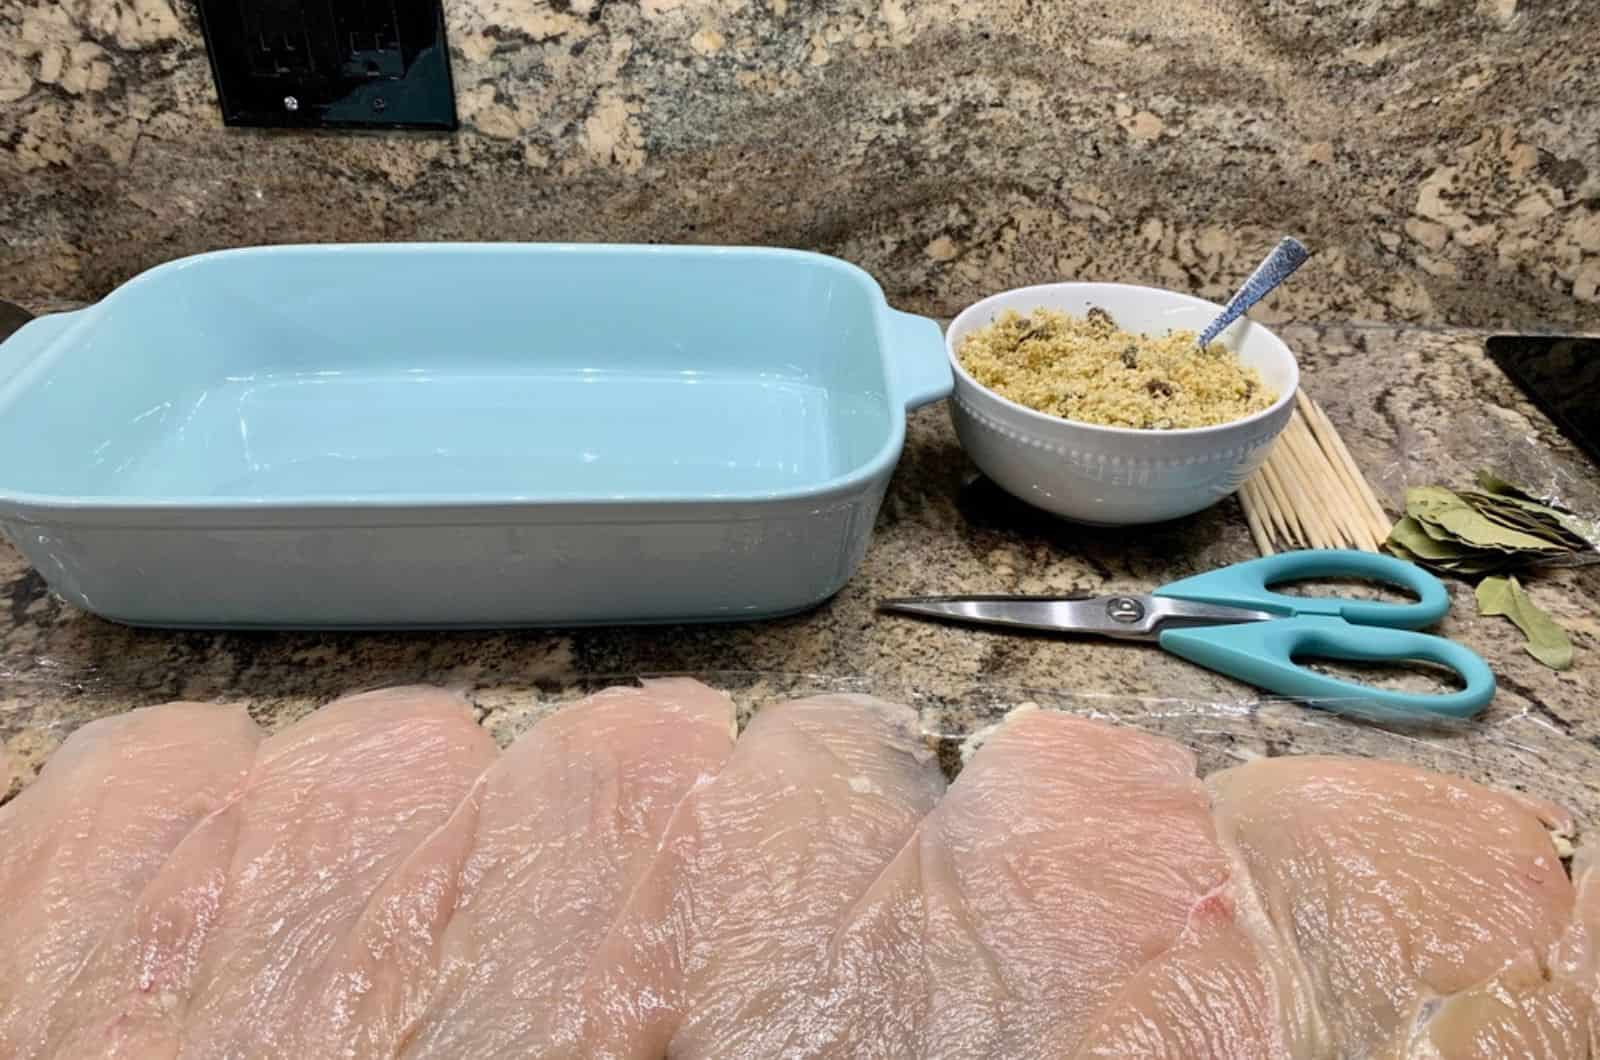 A cooking station to meal prep a chicken